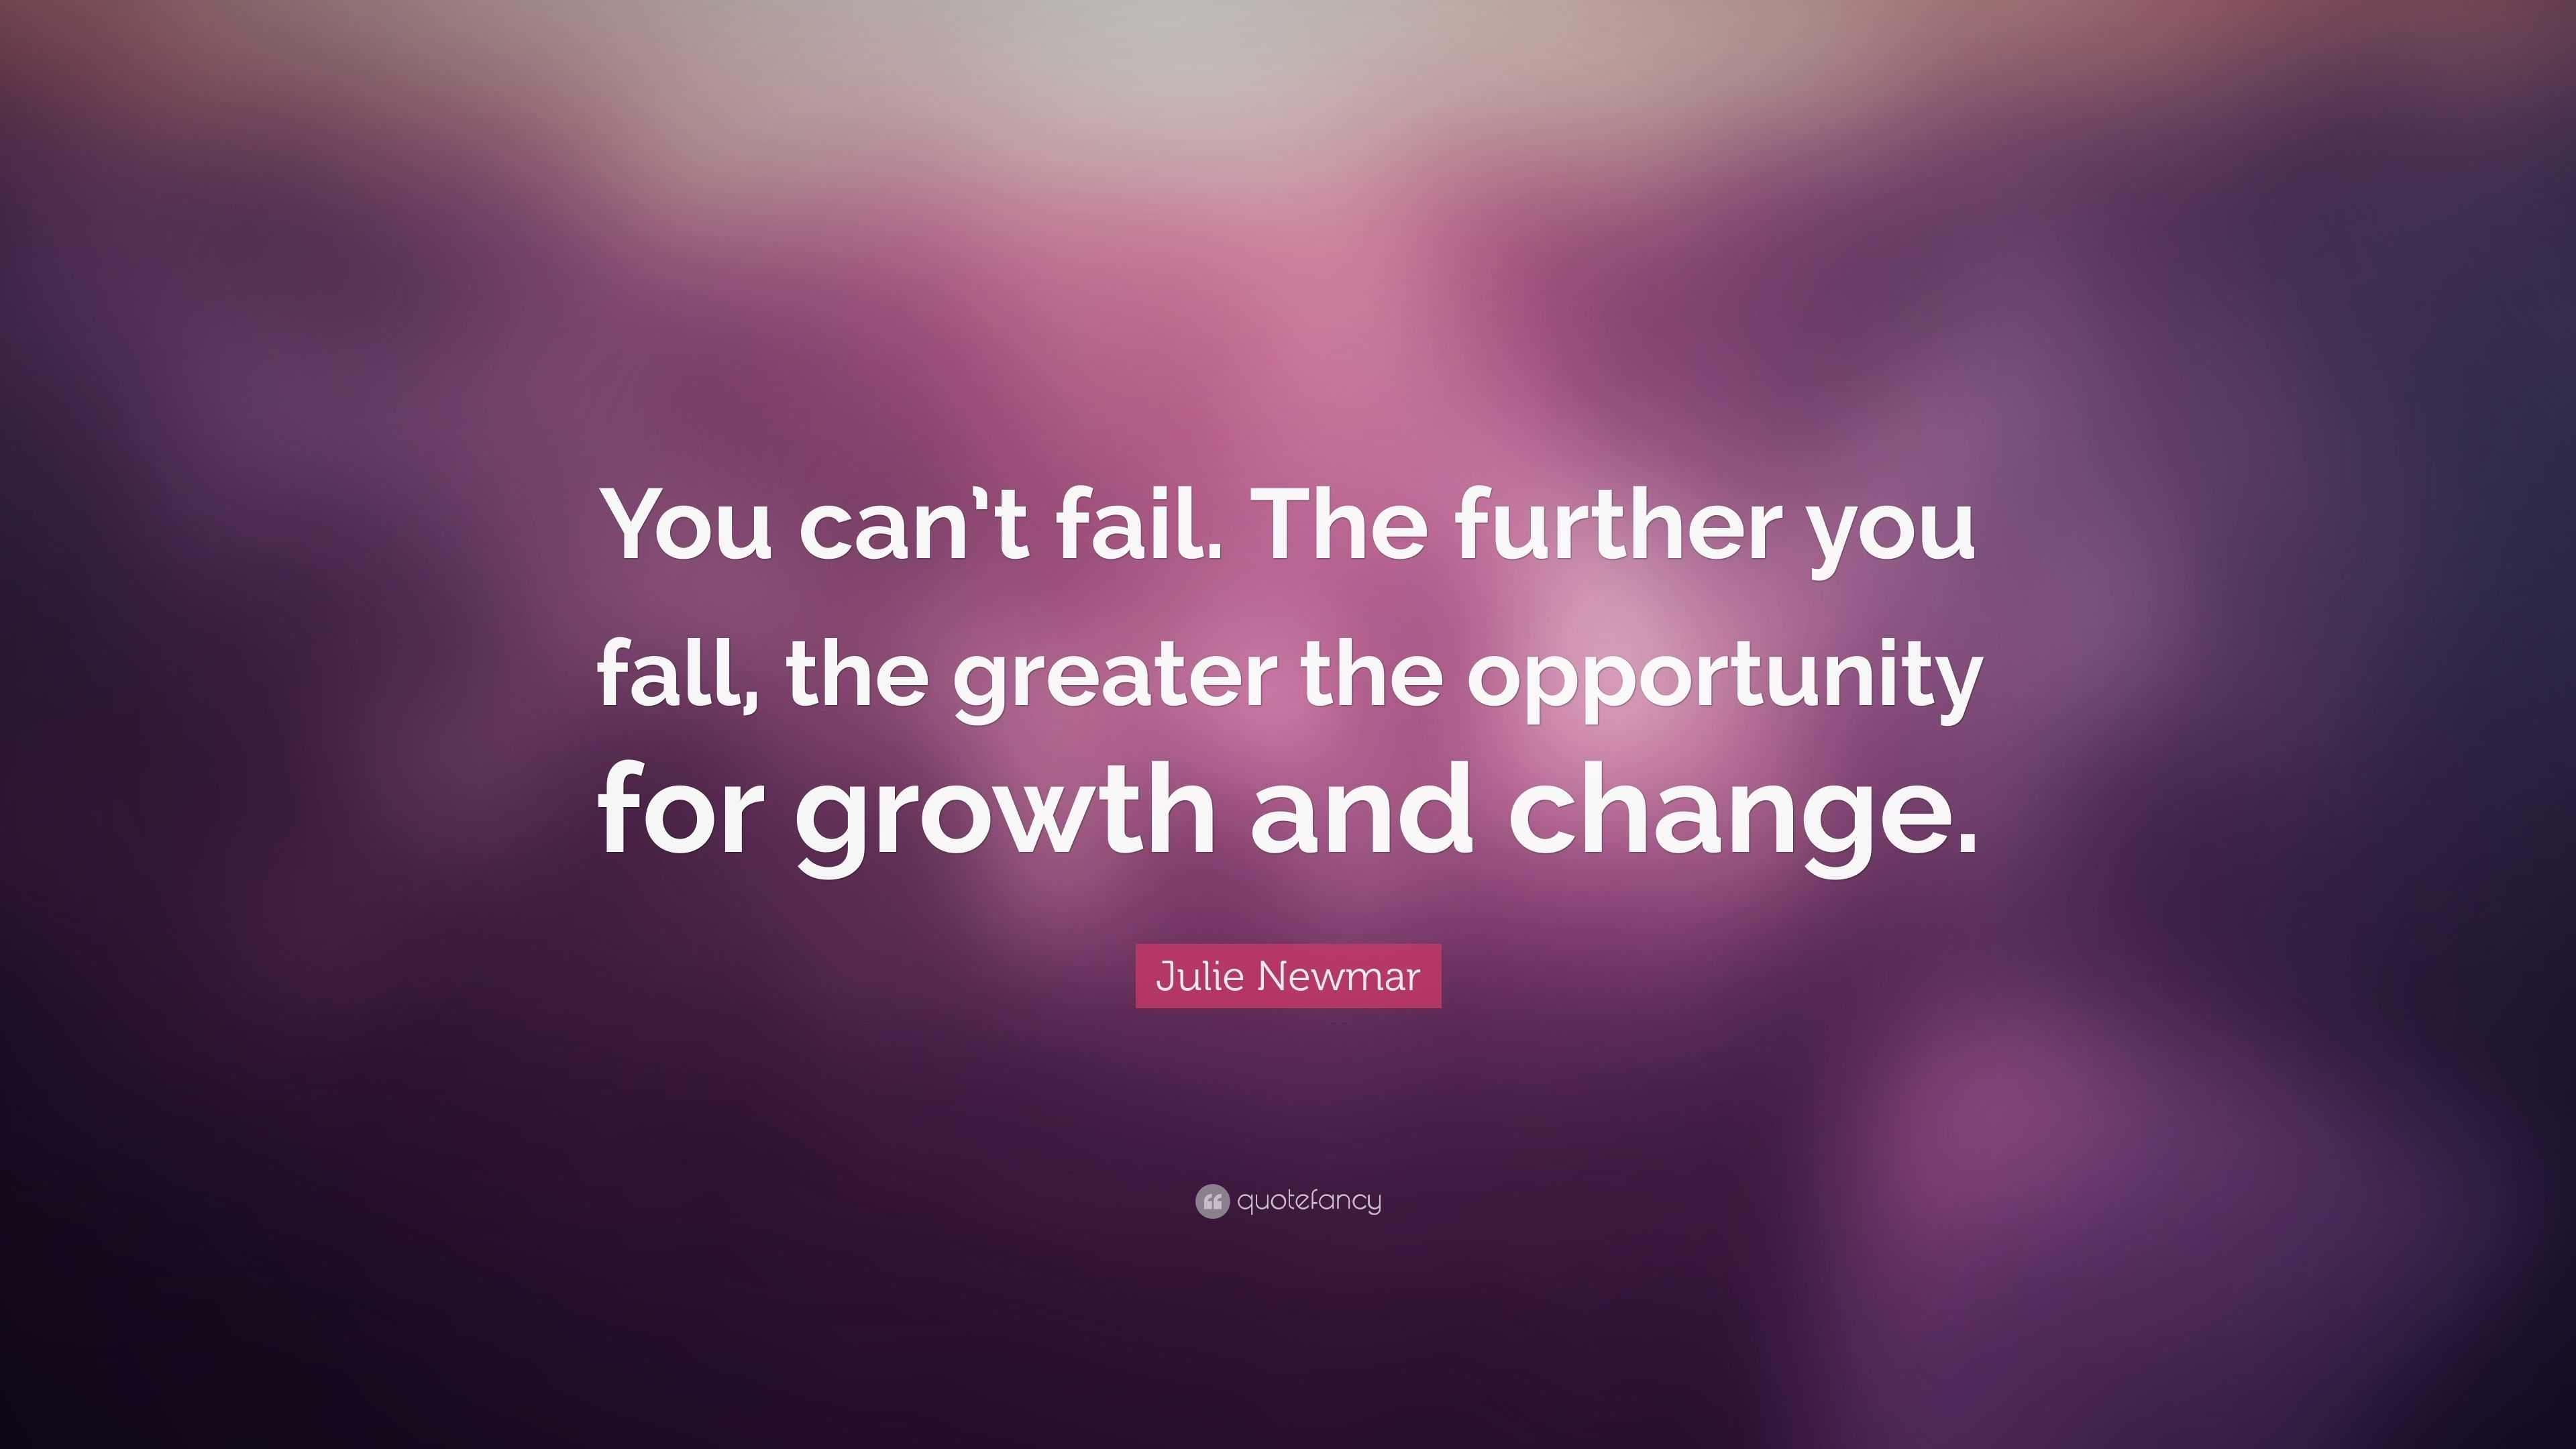 Julie Newmar Quote: “You can’t fail. The further you fall, the greater ...